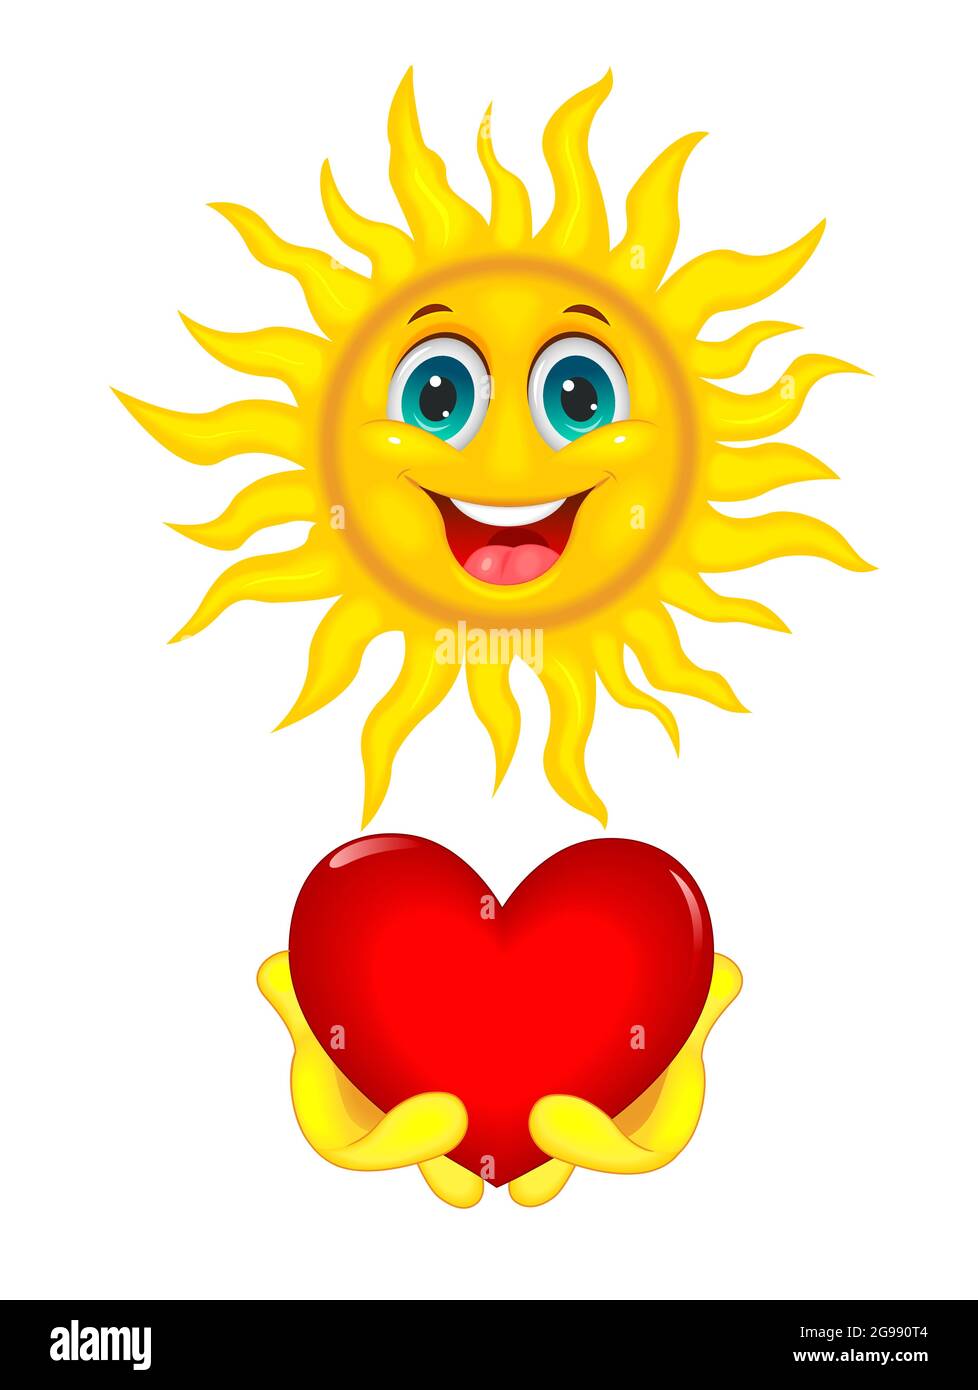 Smiling cartoon sun on a white background. The sun holds a red heart in its hands. Stock Vector